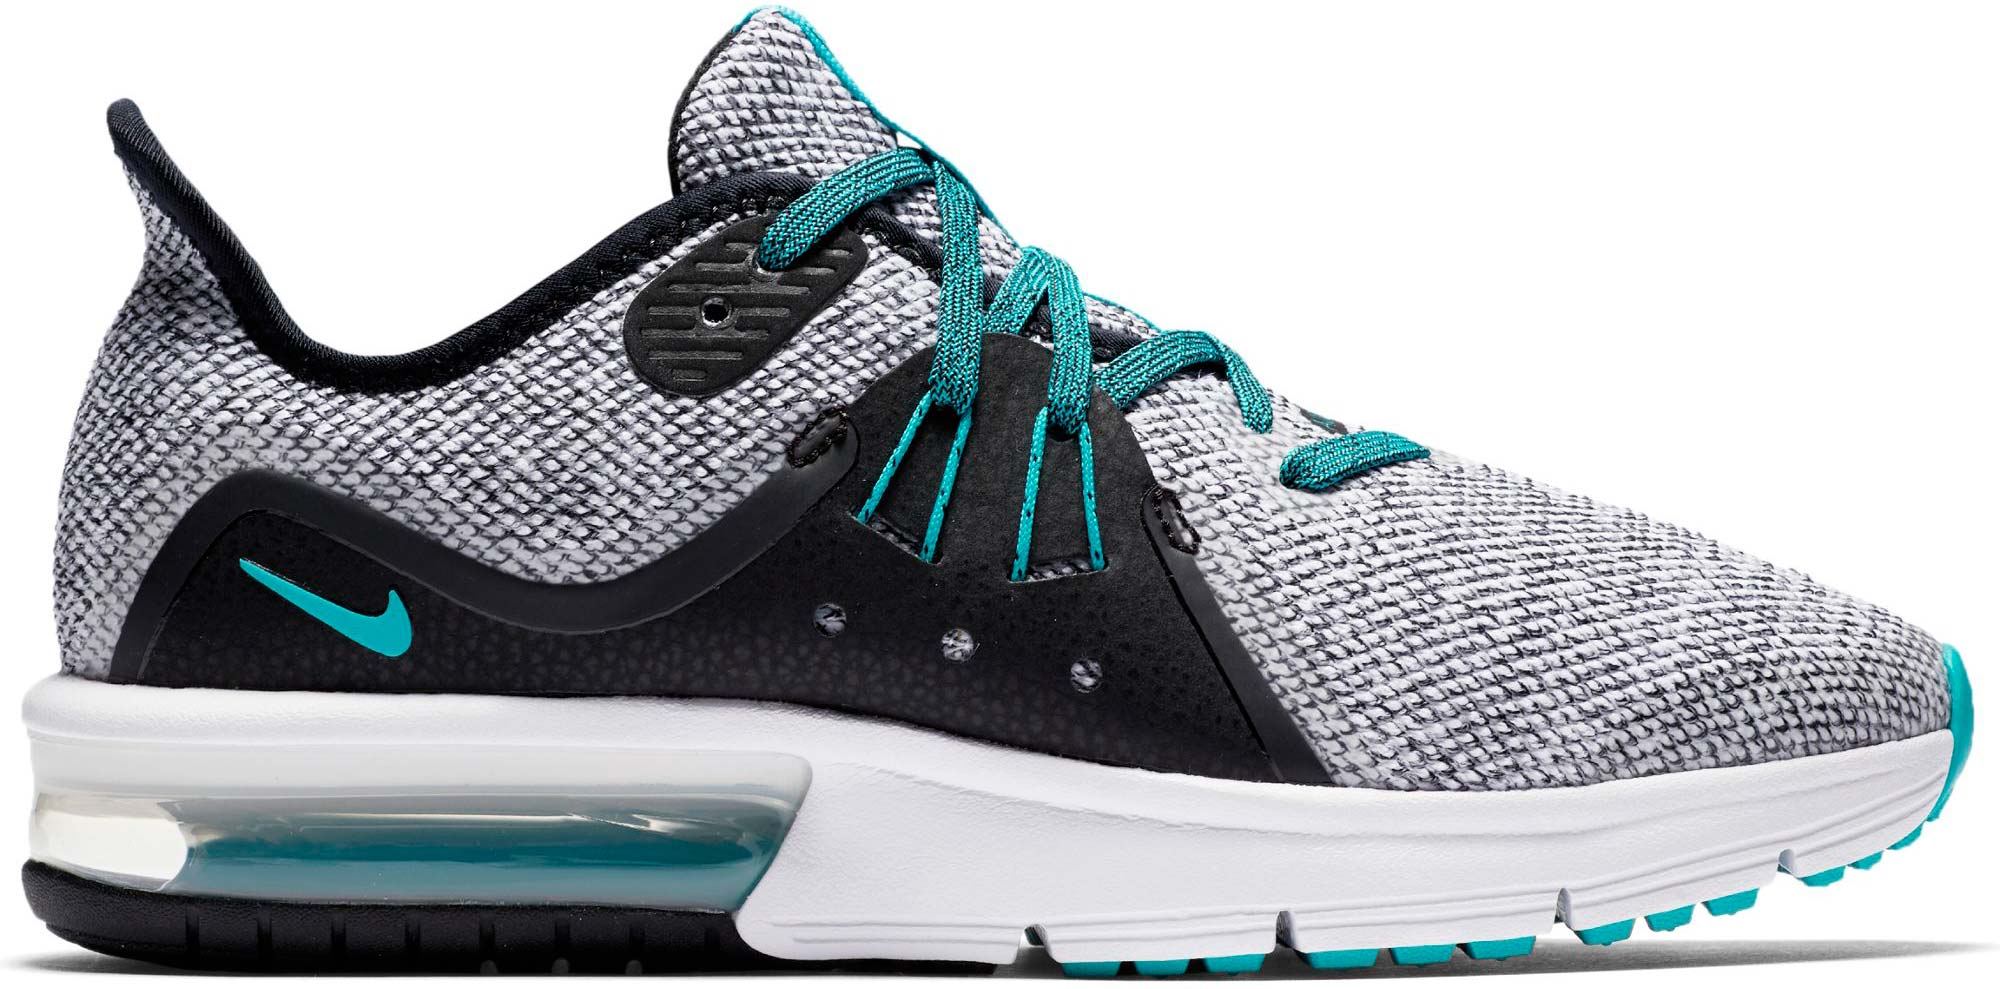 nike air max sequent 3 running